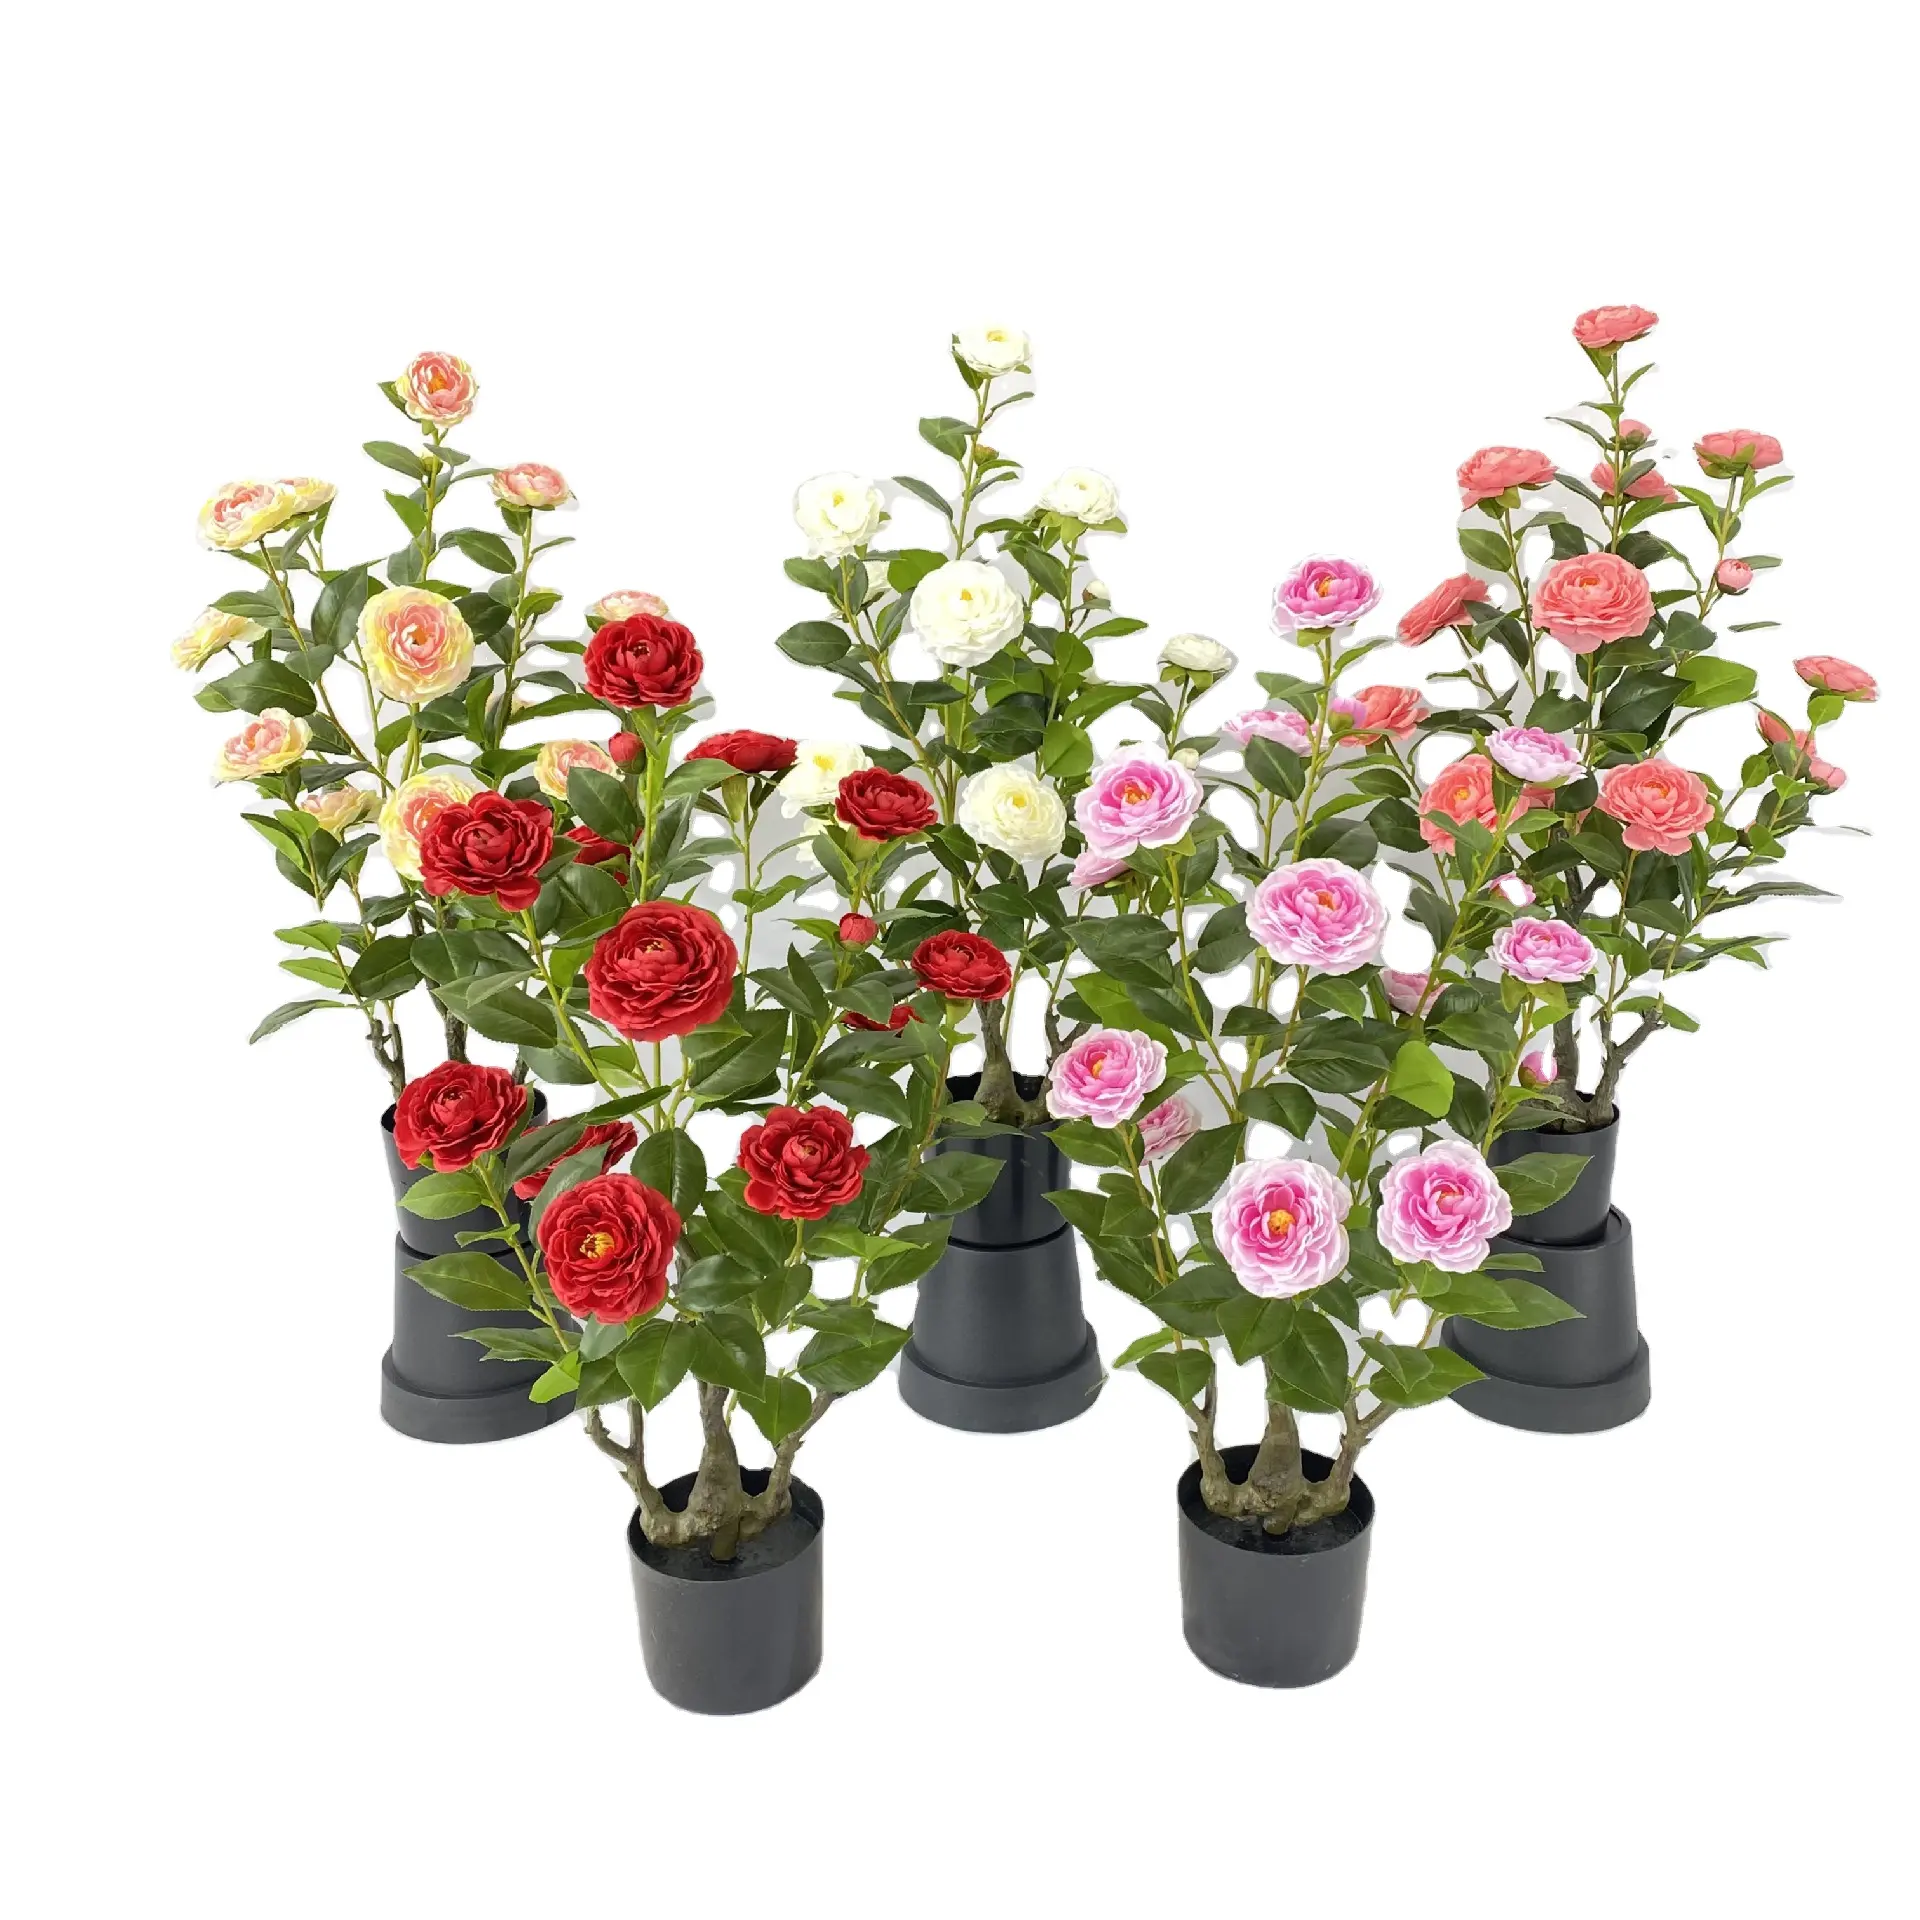 New decor wedding indoor fake camellia peony rose tree potted artificial plant